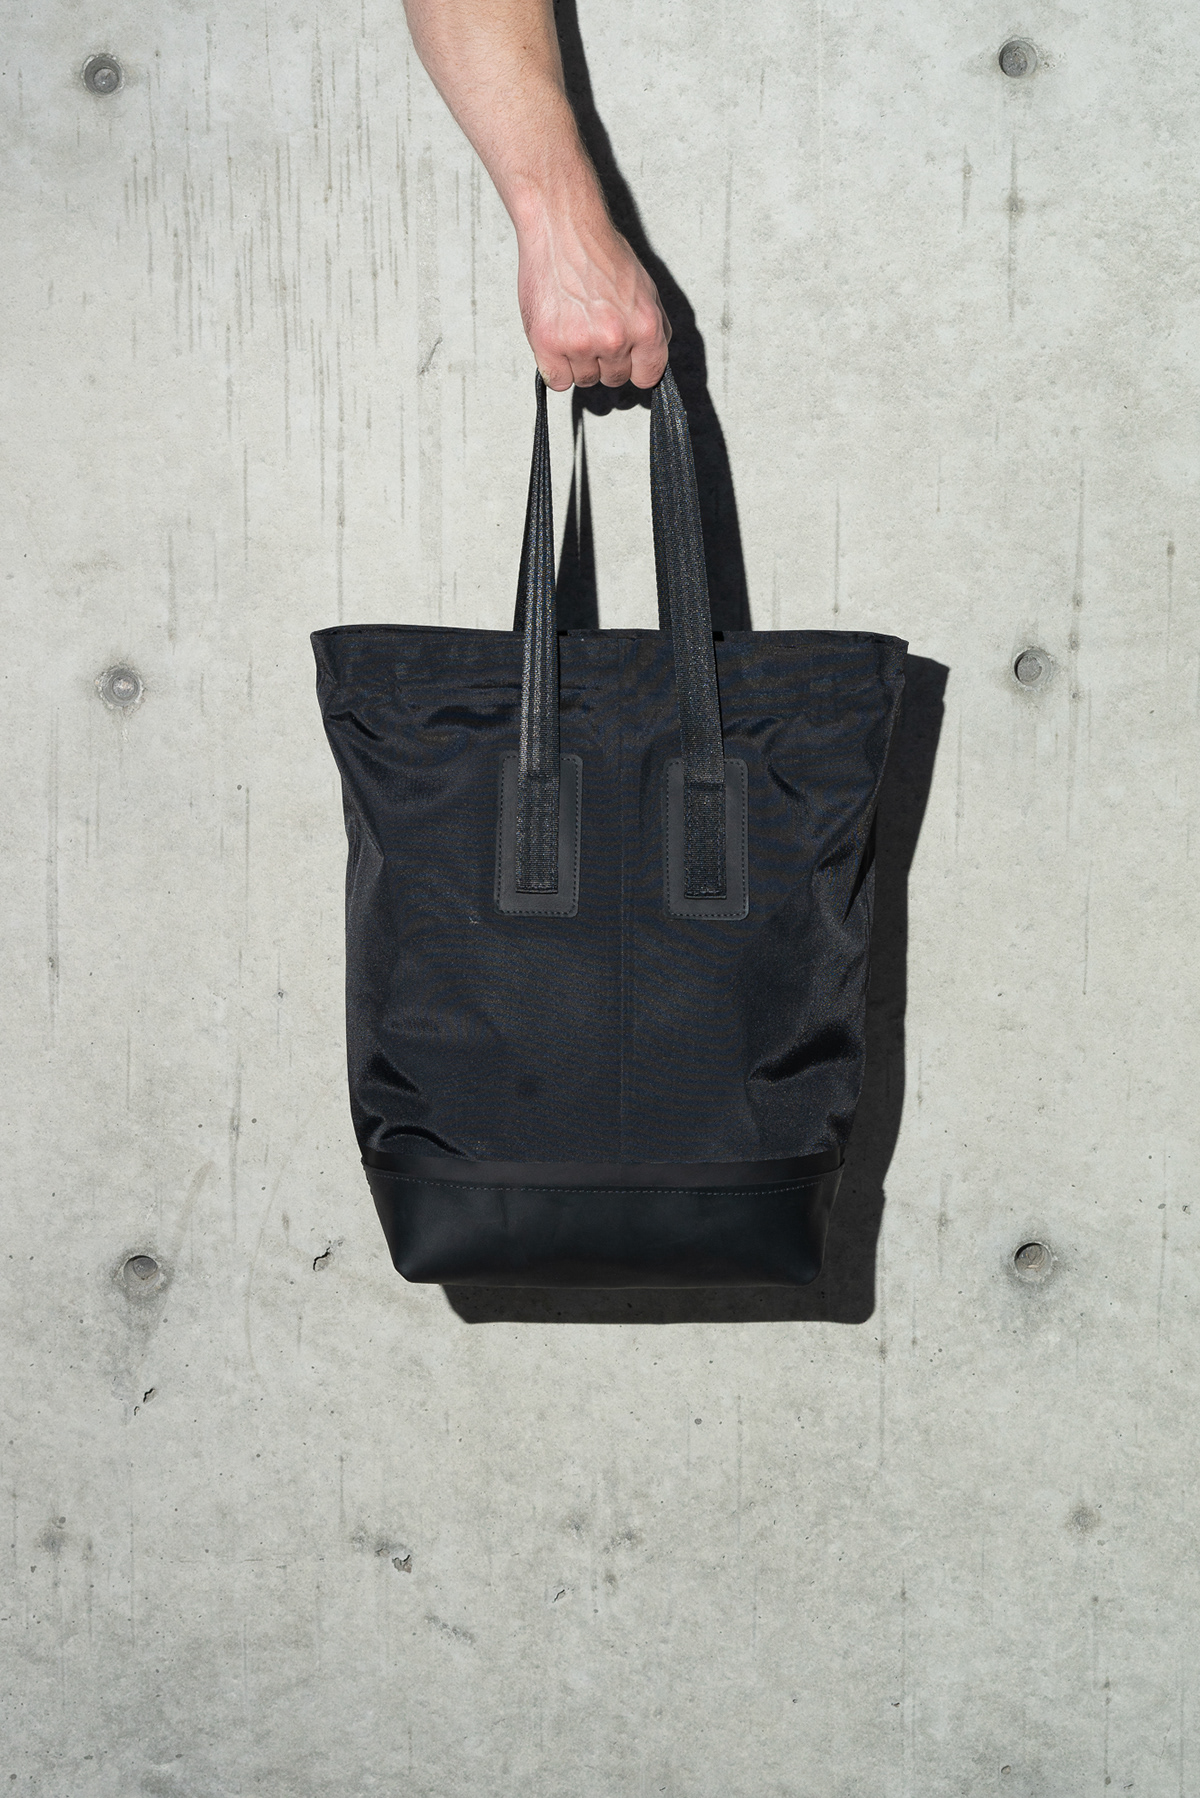 accessories bag bags softgoods Tote Tote Bag